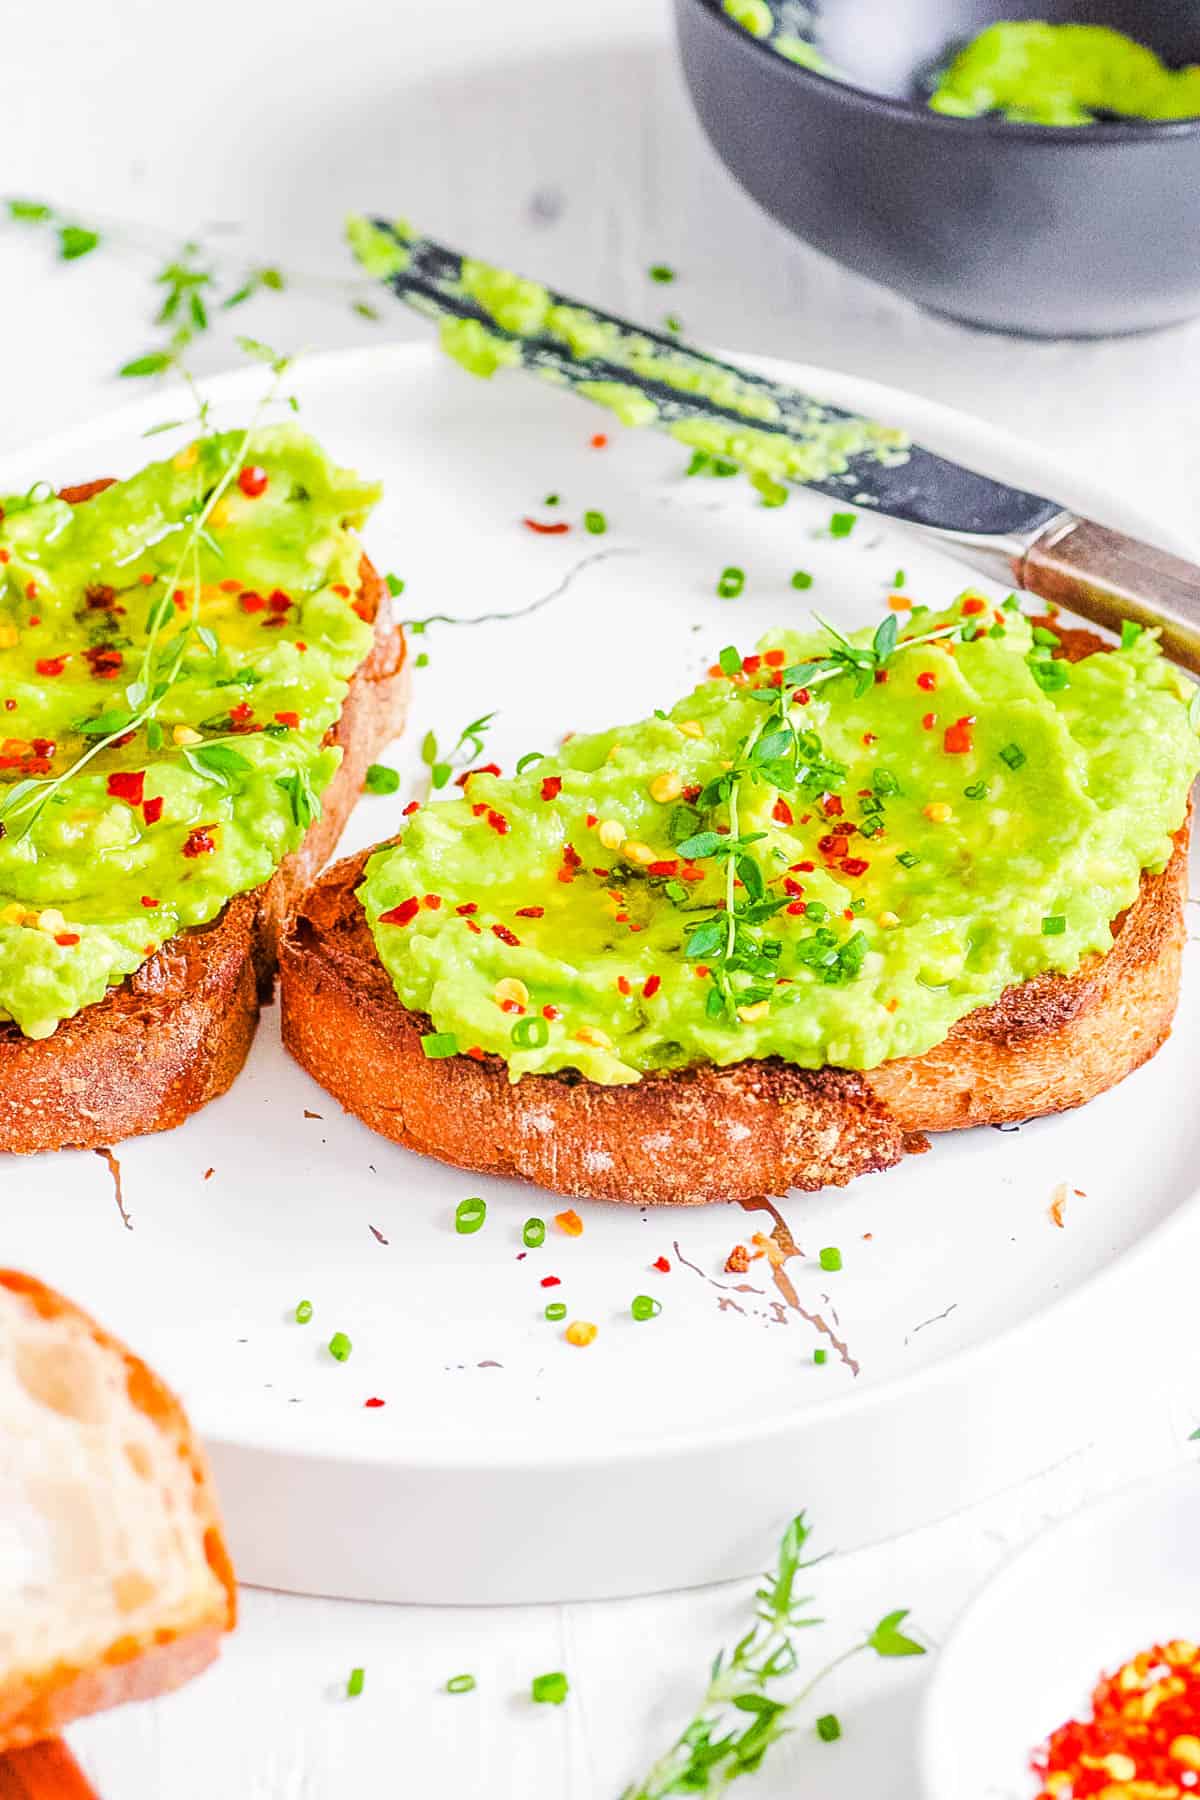 Honey avocado toast with chili flakes on a white plate.